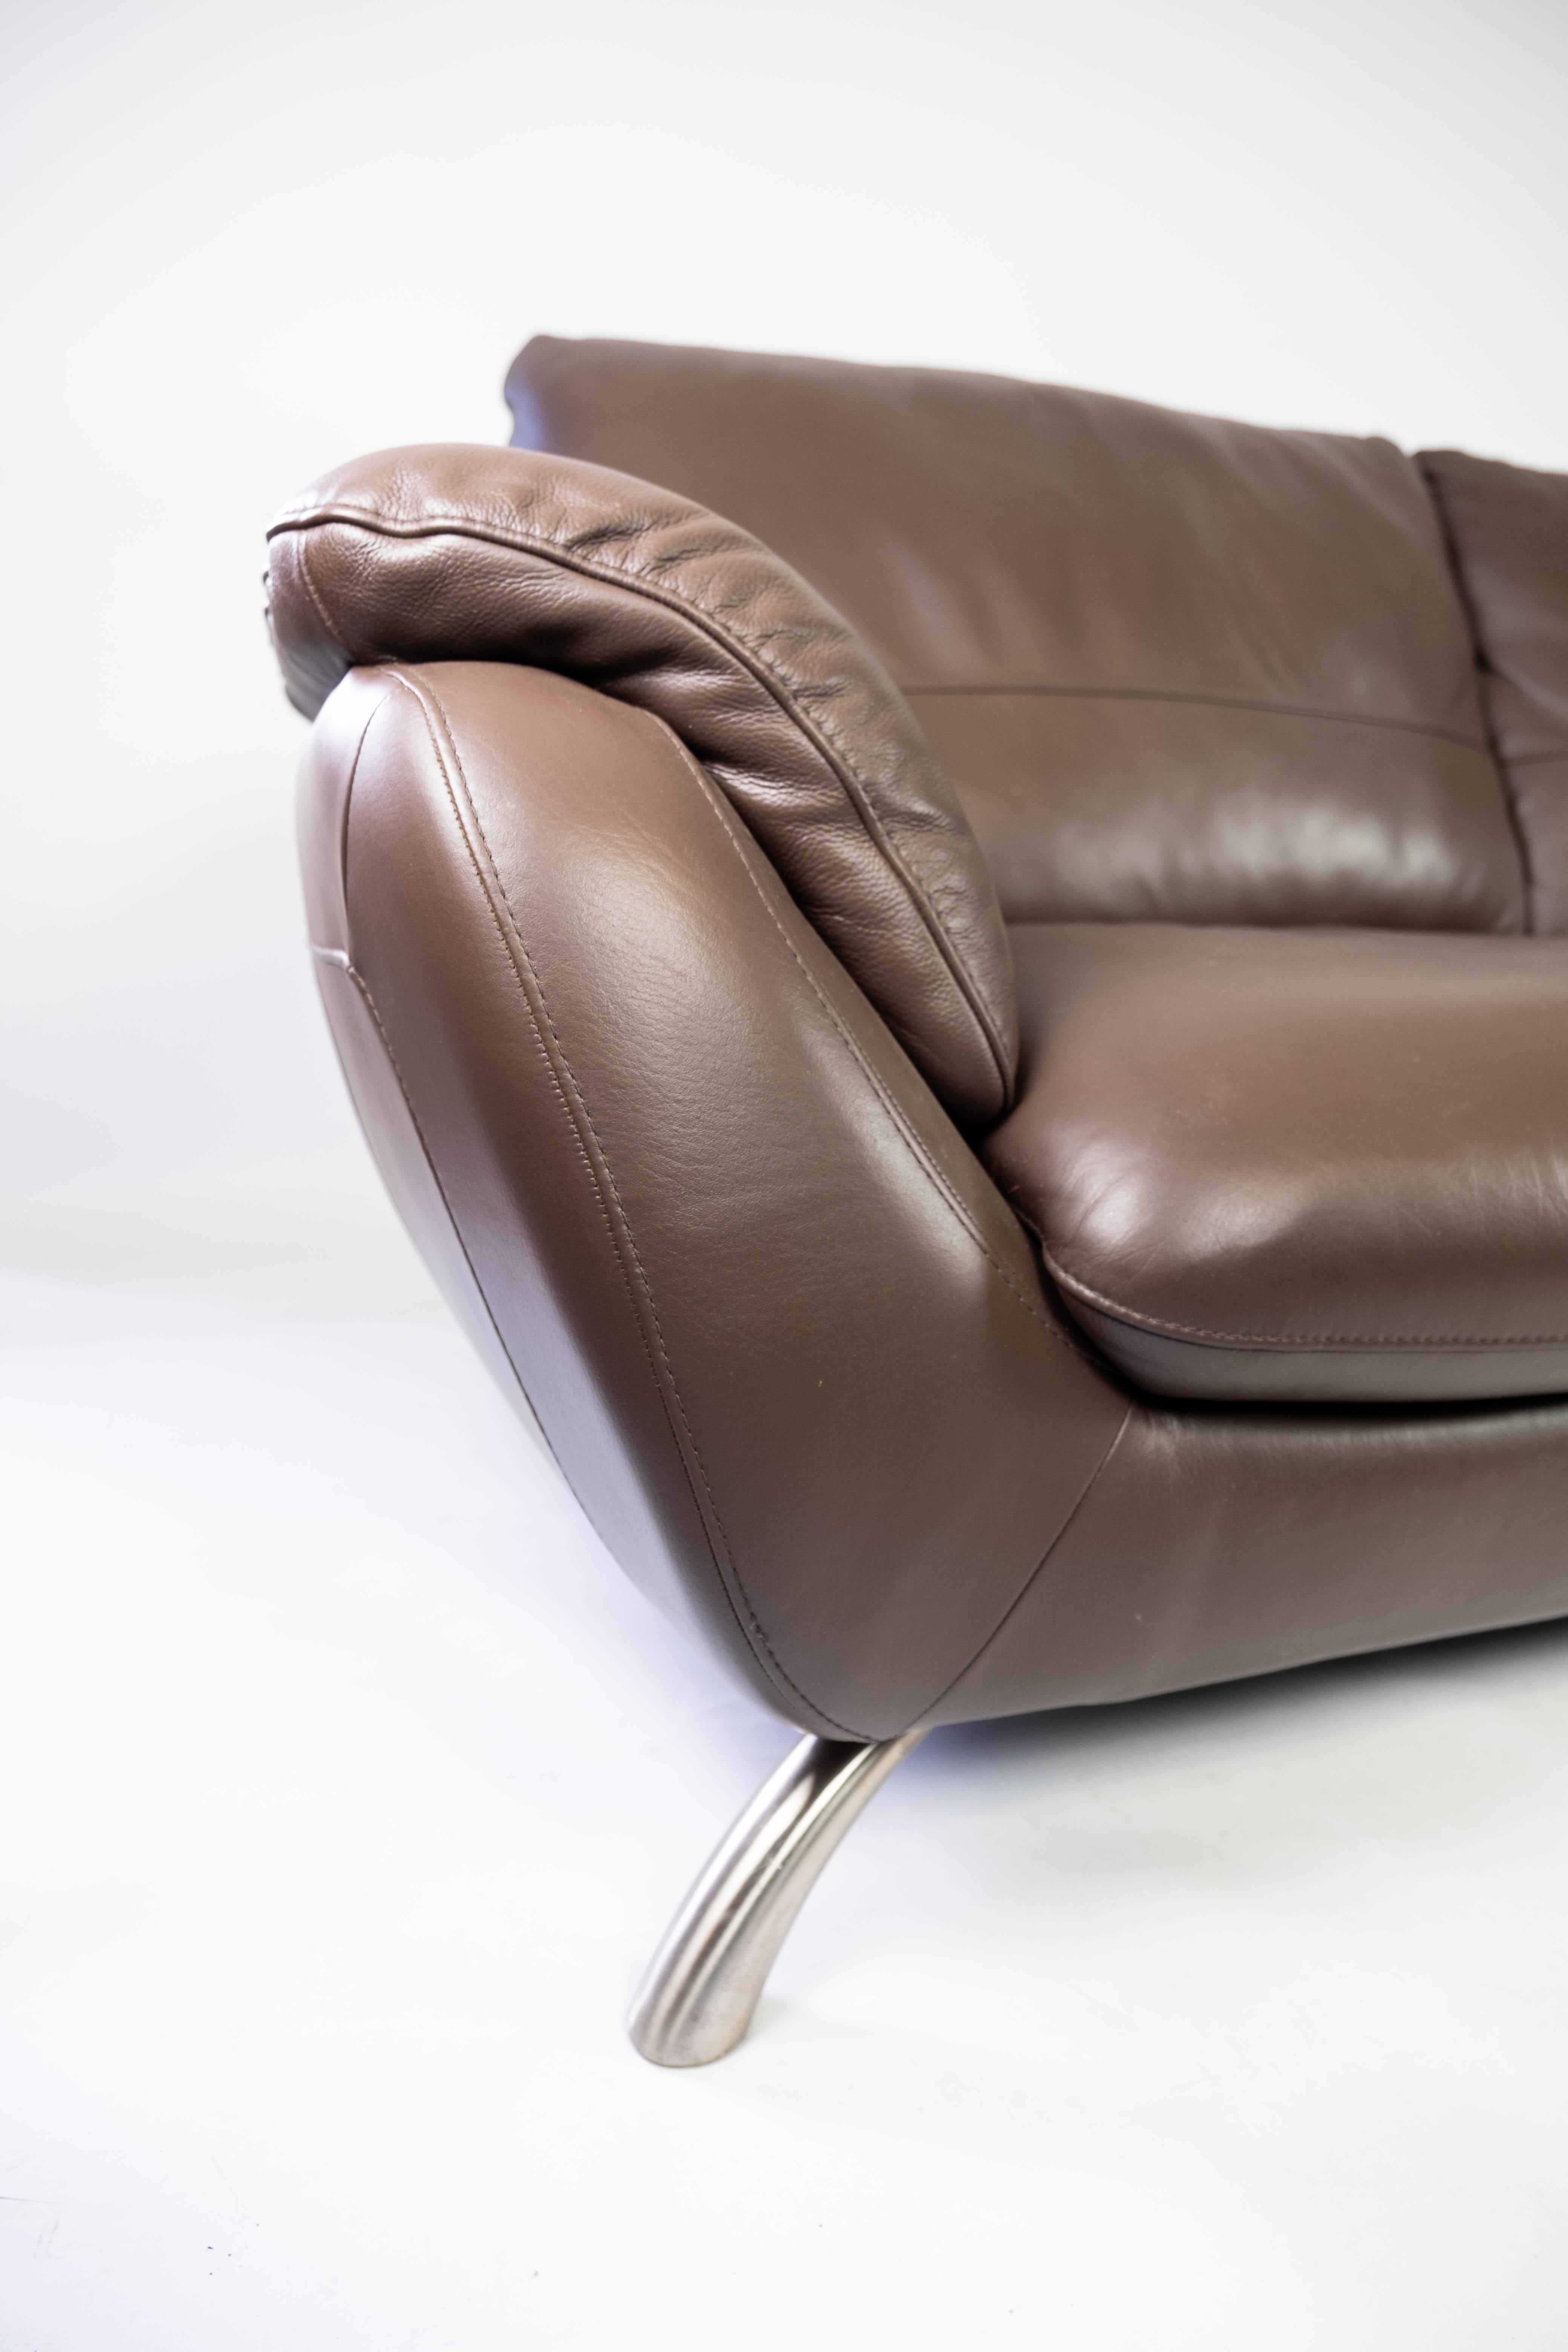 The large two-seater sofa in brown leather with a metal frame, manufactured by Italsofa, is an impressive piece of furniture that exudes both style and comfort. With its elegant design and durable materials, this sofa is an ideal choice for anyone